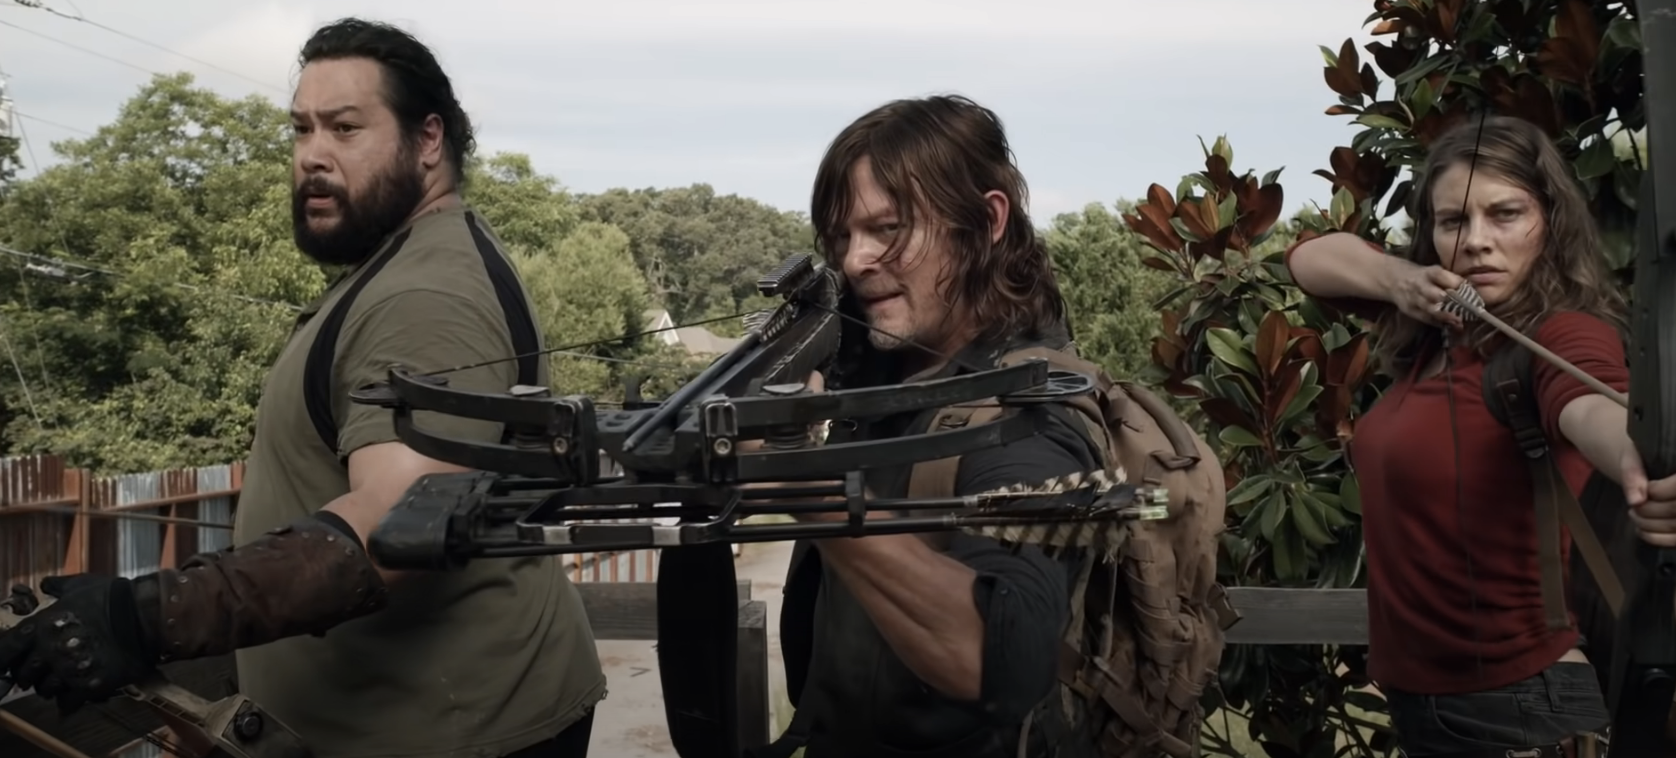 people holding weapons in &quot;The Walking Dead&quot;